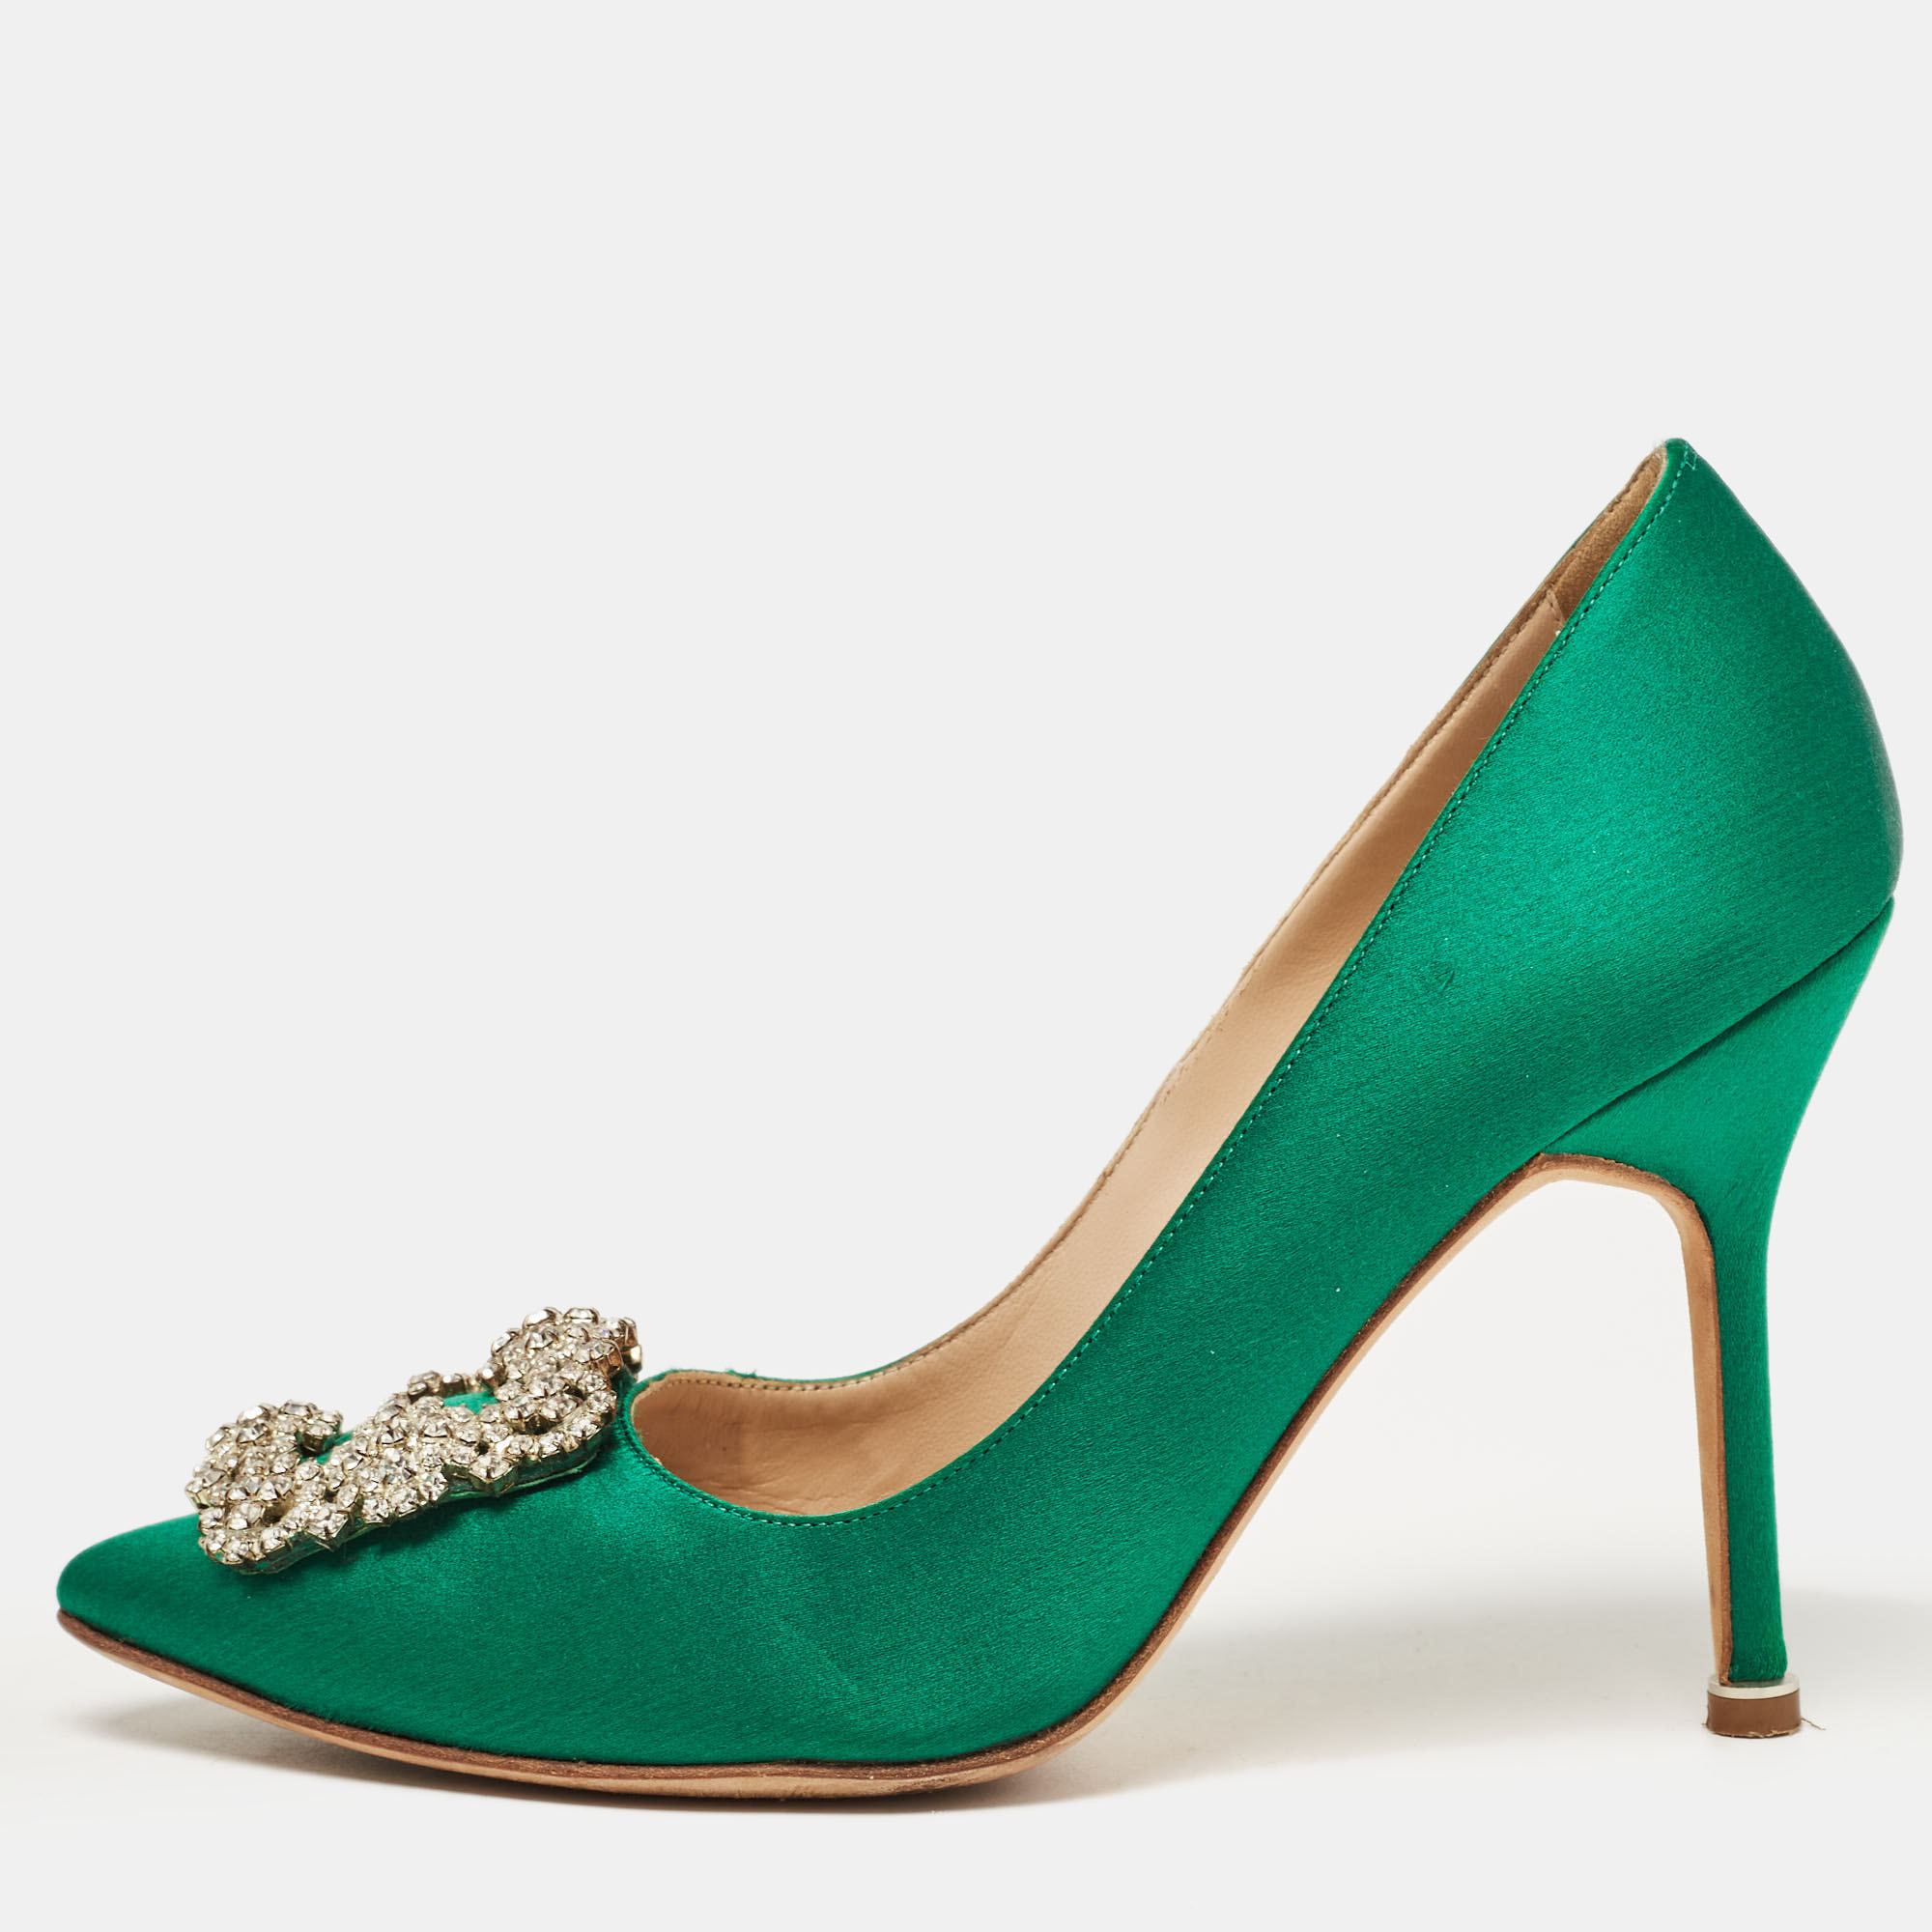 Pre-owned Manolo Blahnik Green Satin Hangisi Pumps Size 36